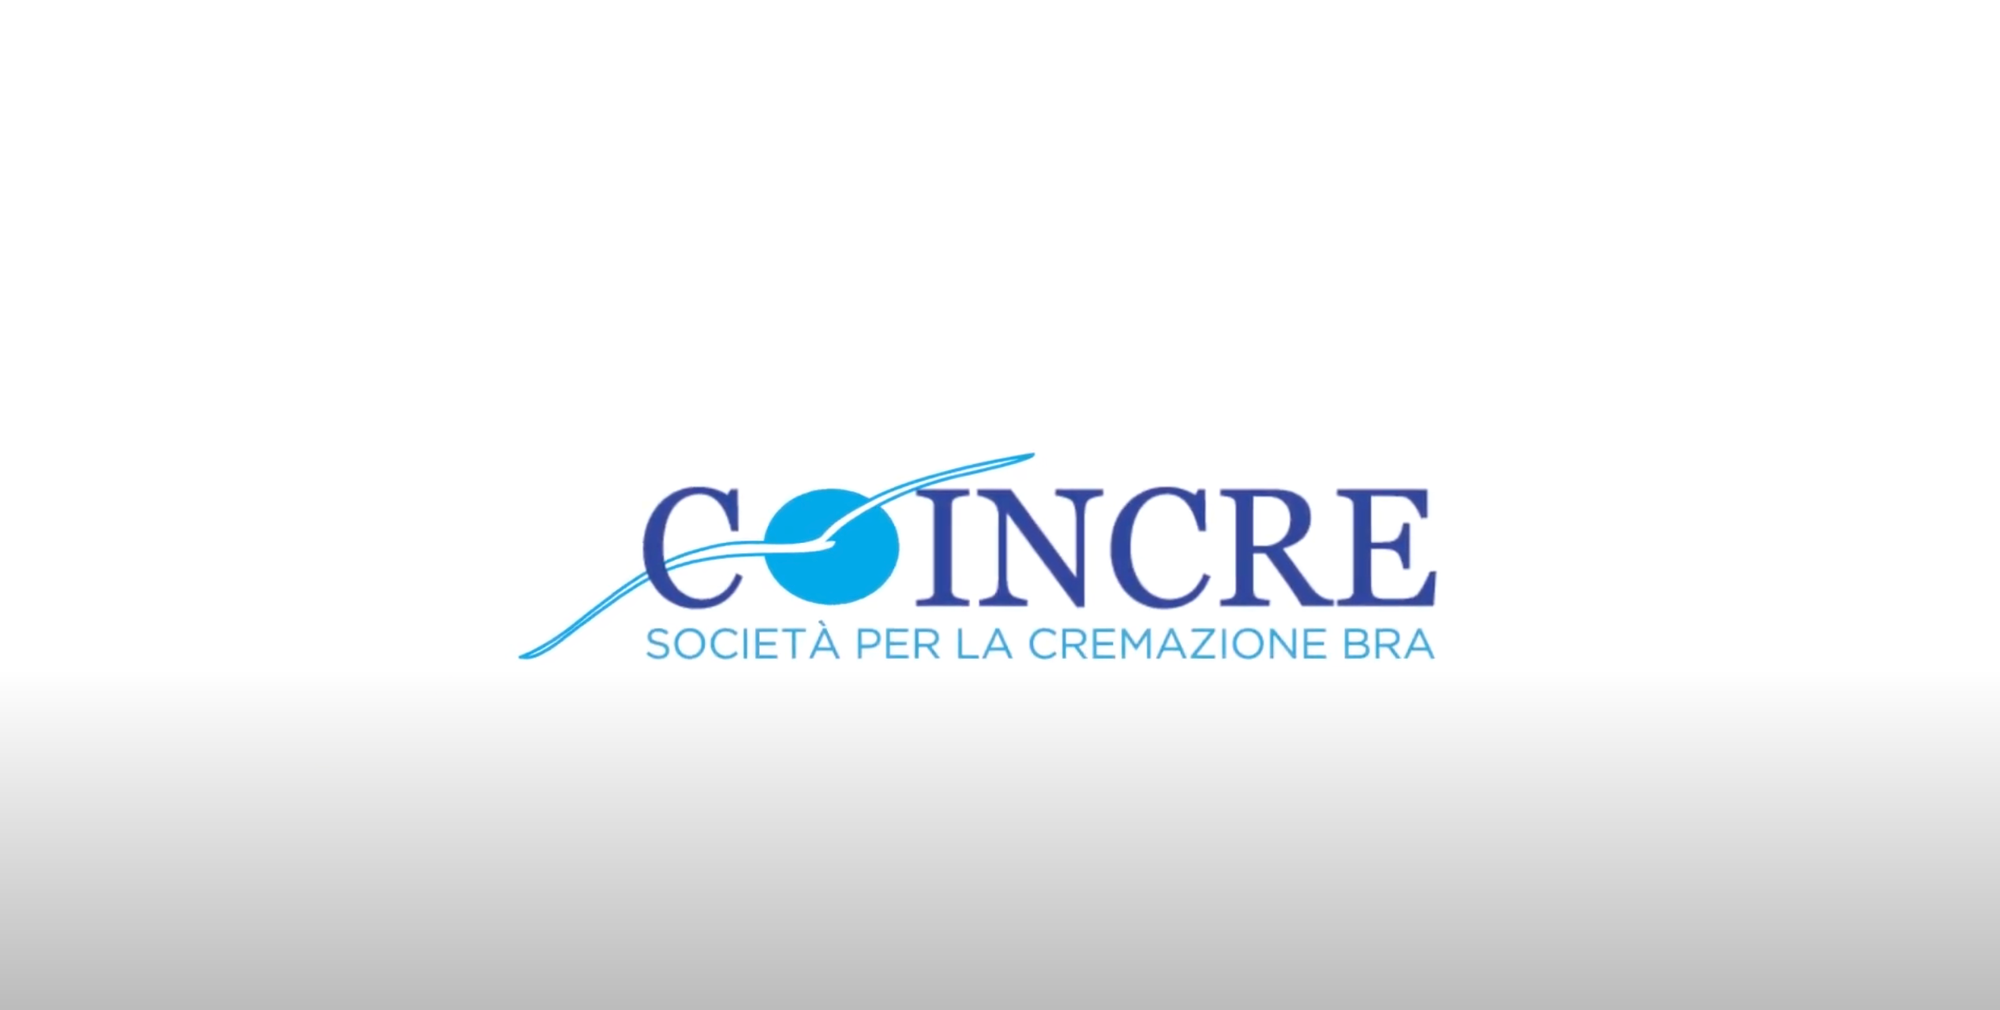 SECURCEN℗ (EXW) - COINCRE (BRA, CUNEO, ITALY): TRACEABILITY OF THE ASH DURING THE CREAMING PROCESS WITH THE SECURCEN℗ SYSTEM.